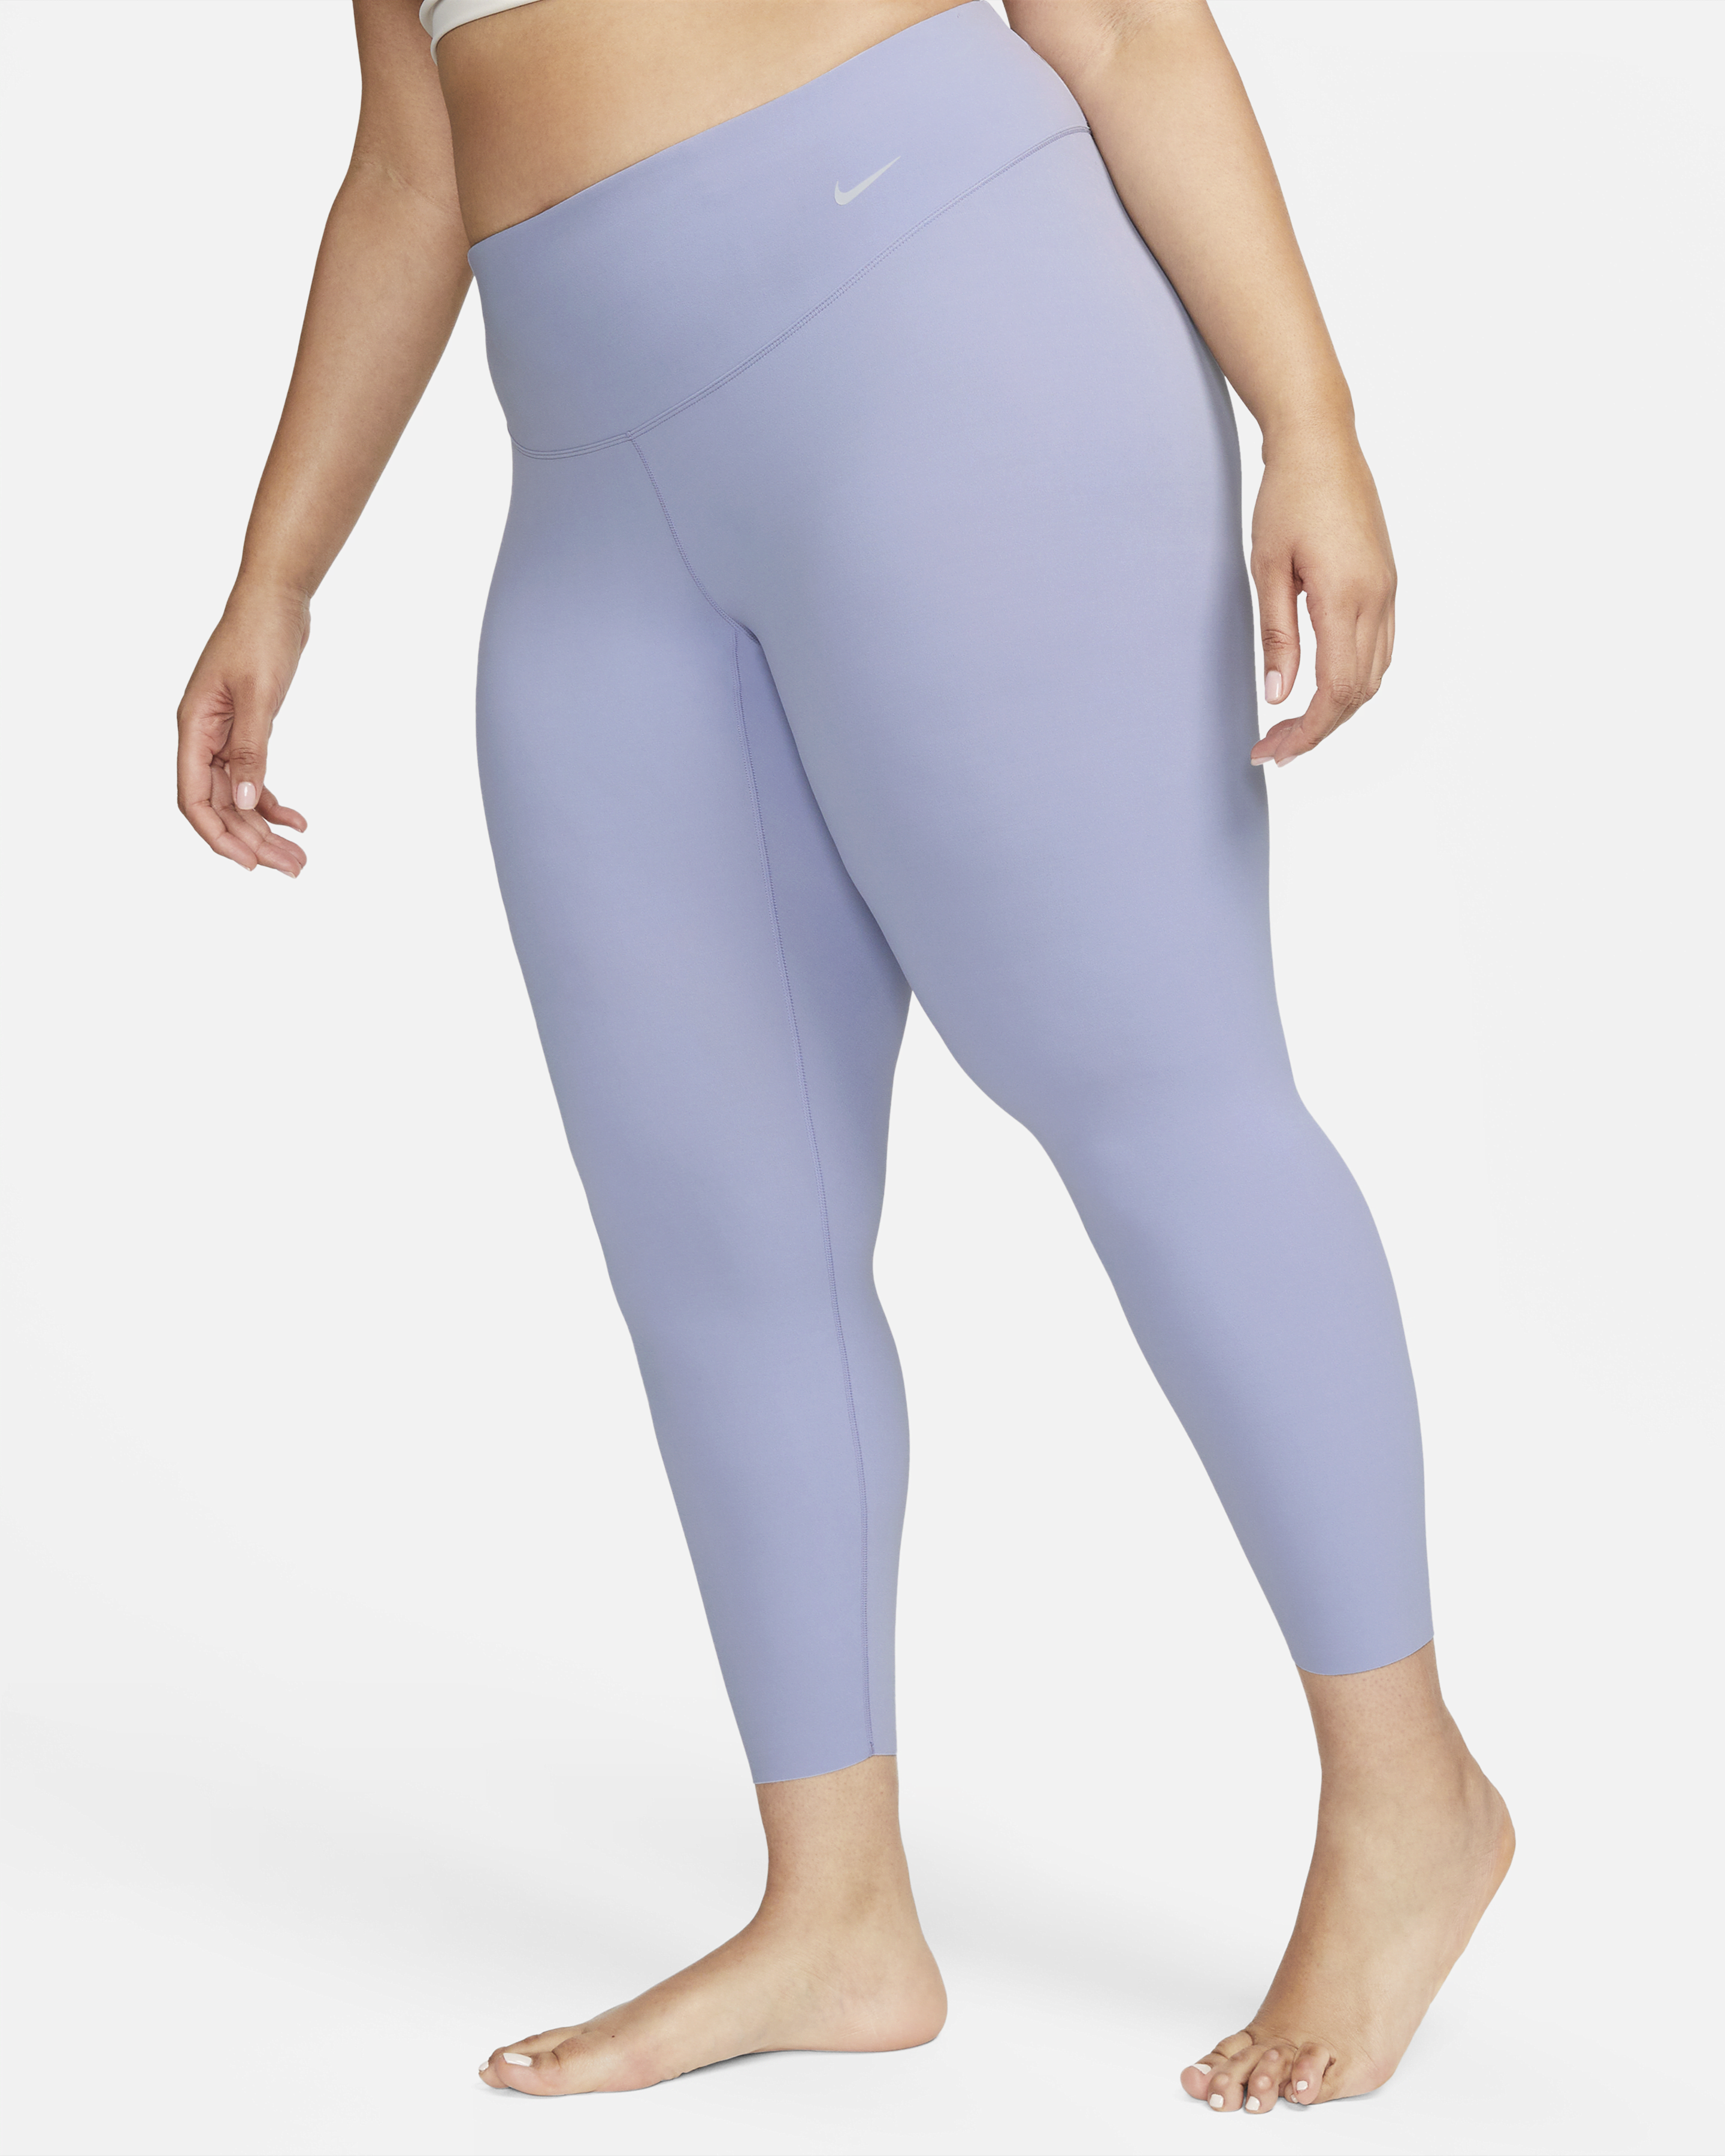  Fanka Women's Full Length Compression Body Sculpt Leggings for  Women Tummy Control High Waisted Through Reversible Wear : Clothing, Shoes  & Jewelry